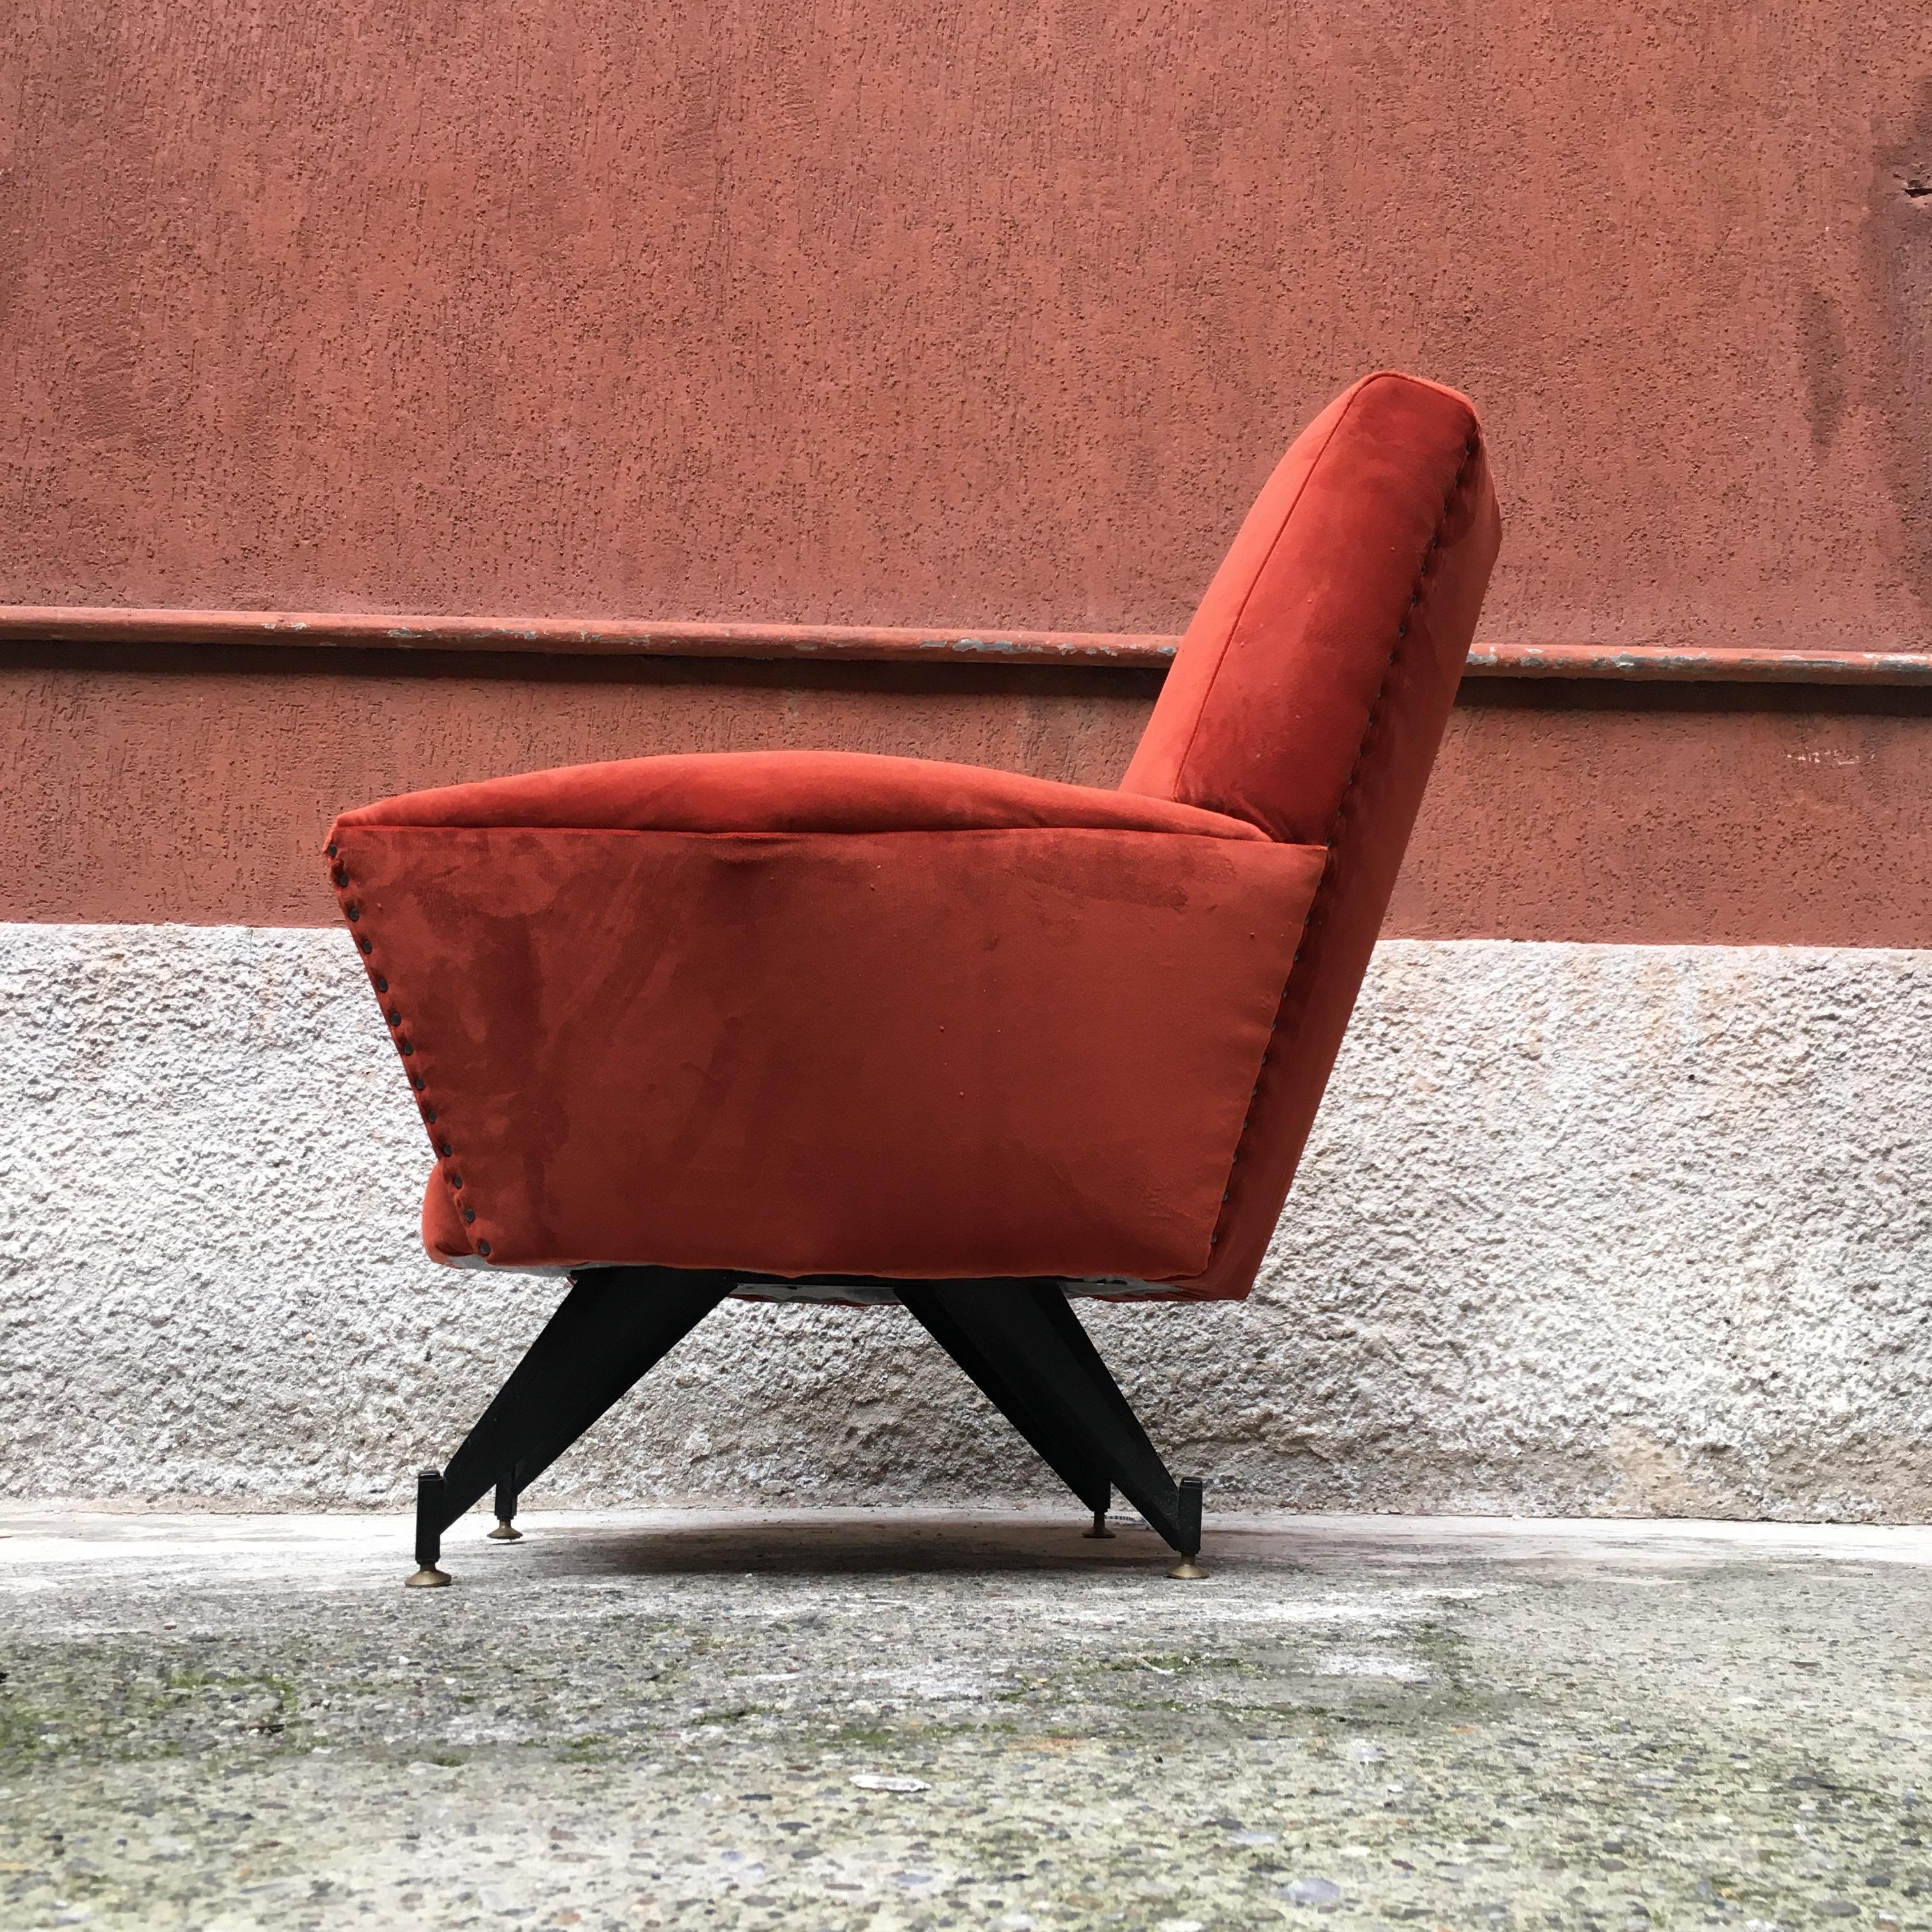 rust colored armchair